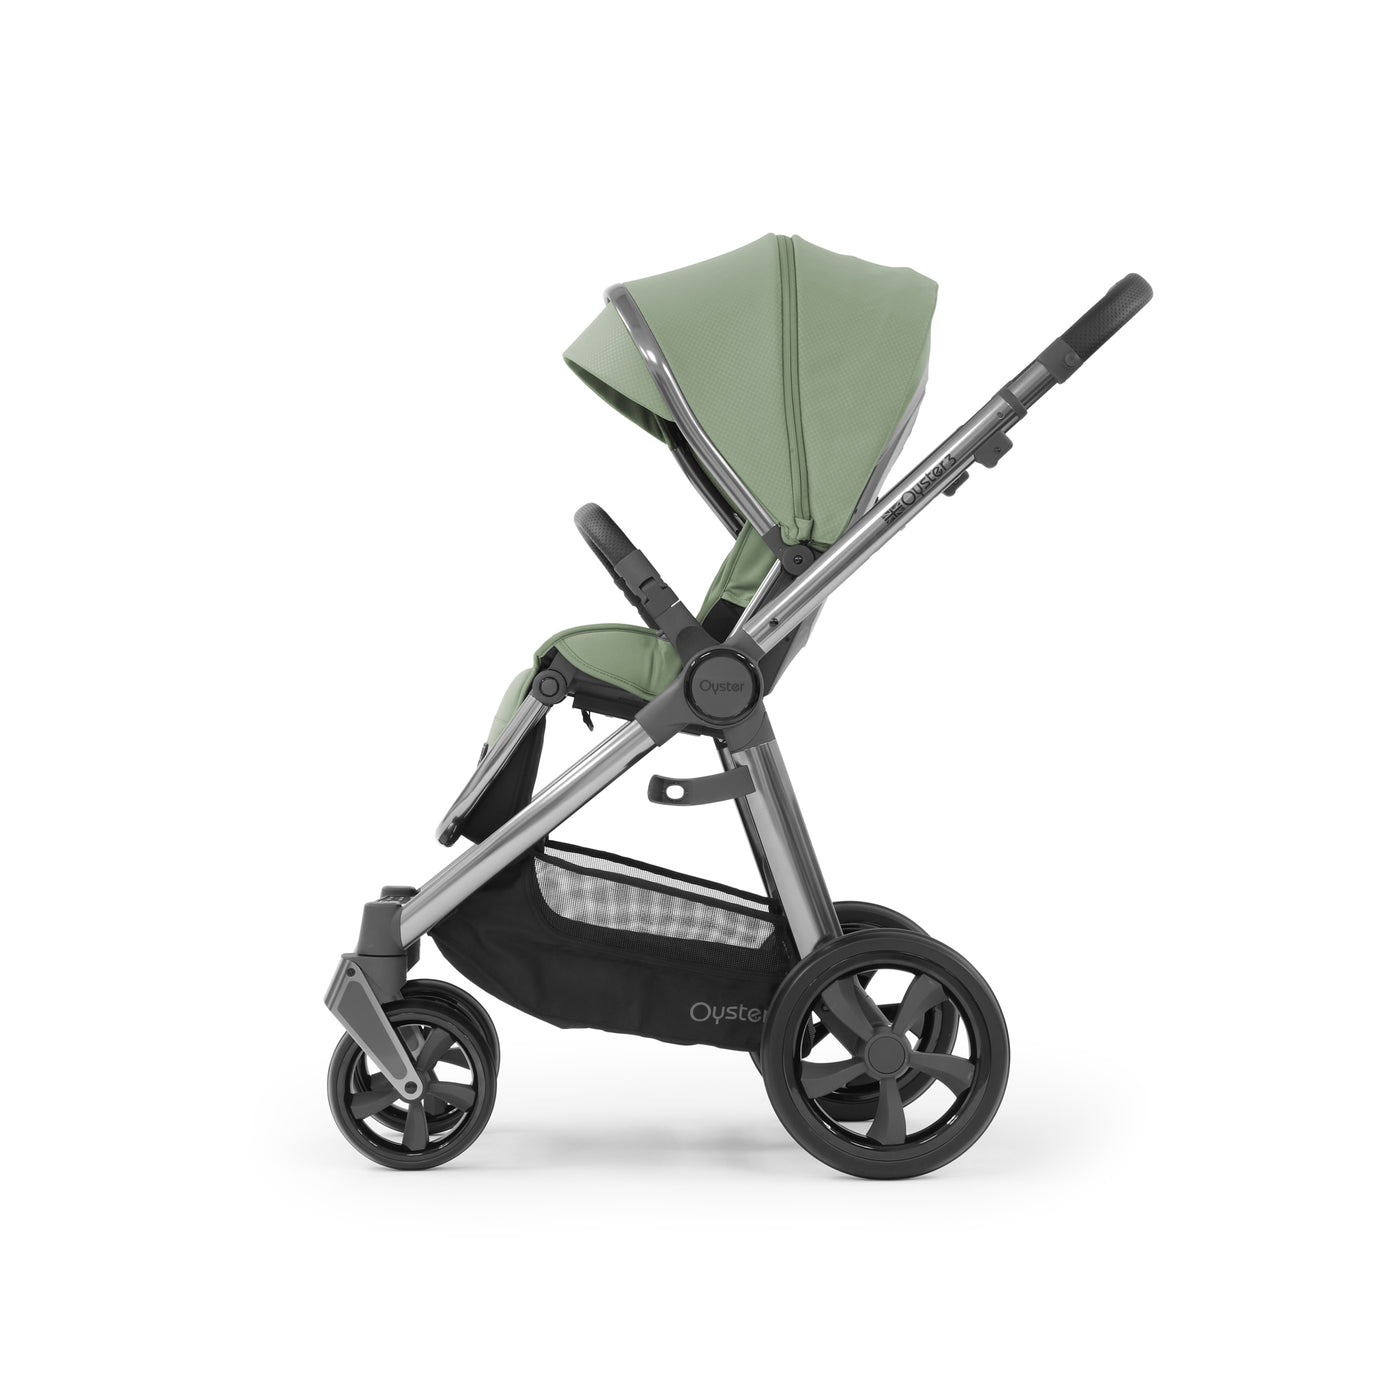 Babystyle Oyster 3 Ultimate Bundle with Maxi-Cosi Pebble 360 Pro & Base - Spearmint